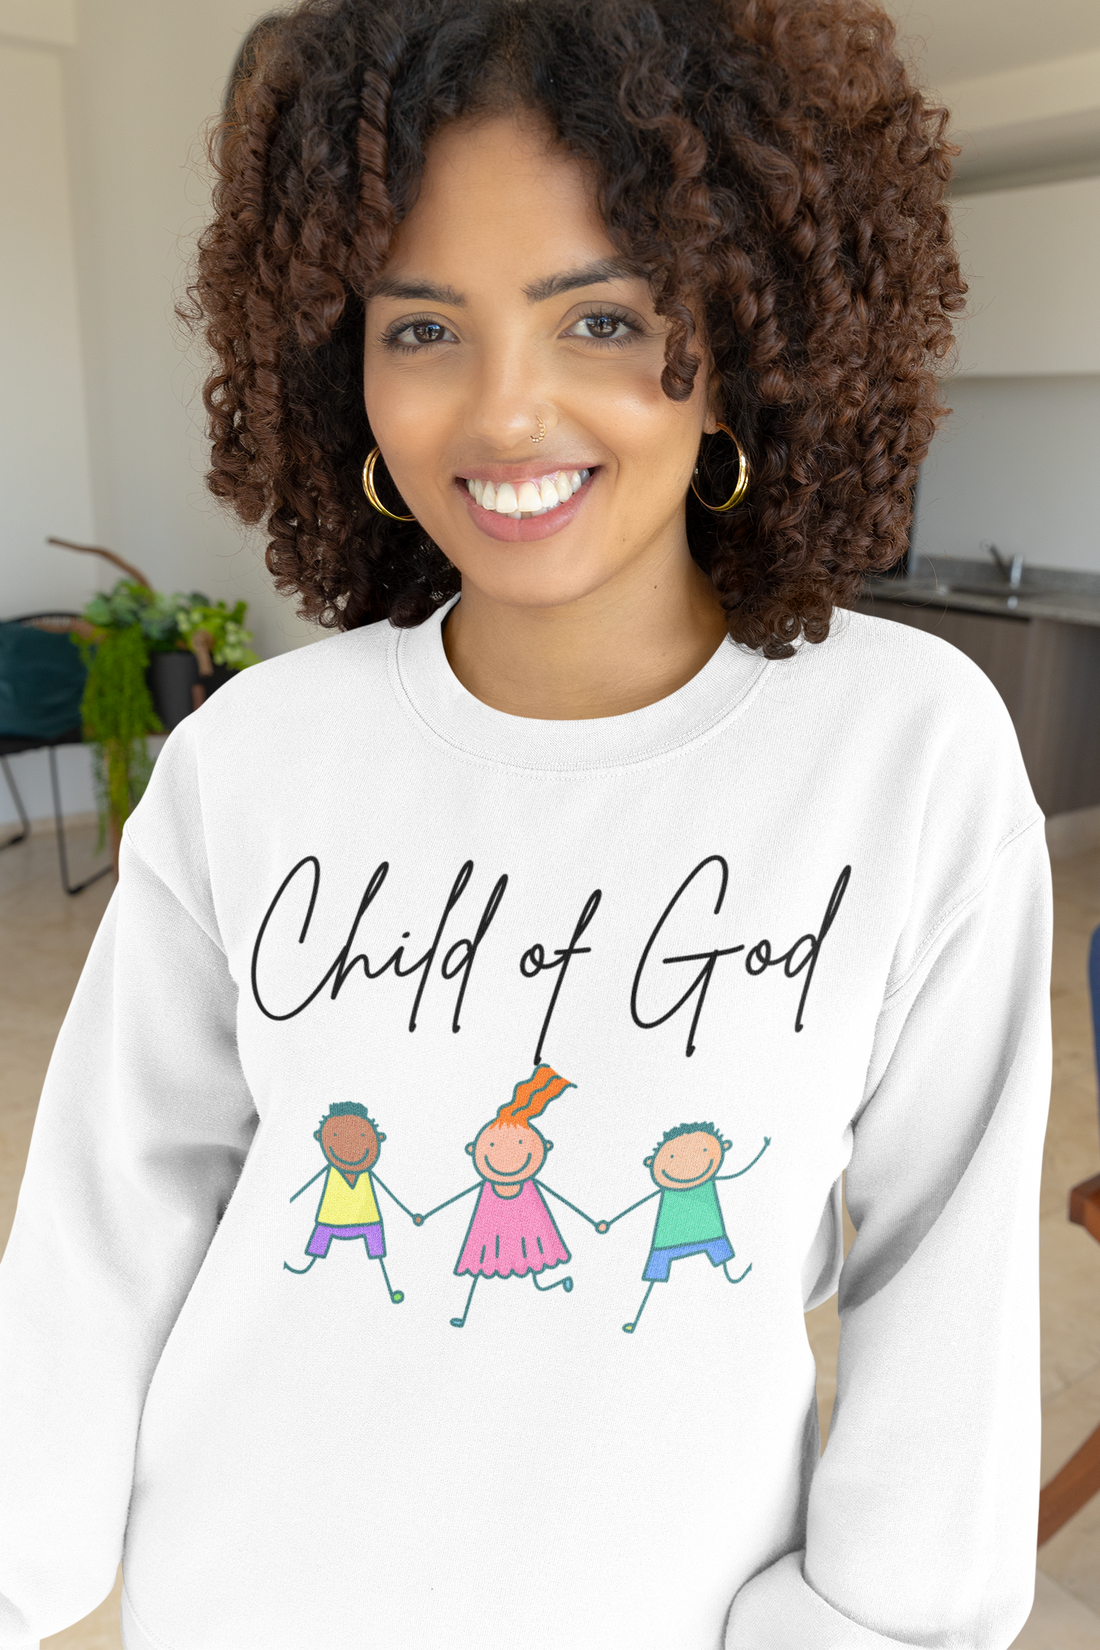 Finding Your Place in the World: The Beauty of Being a Child of God